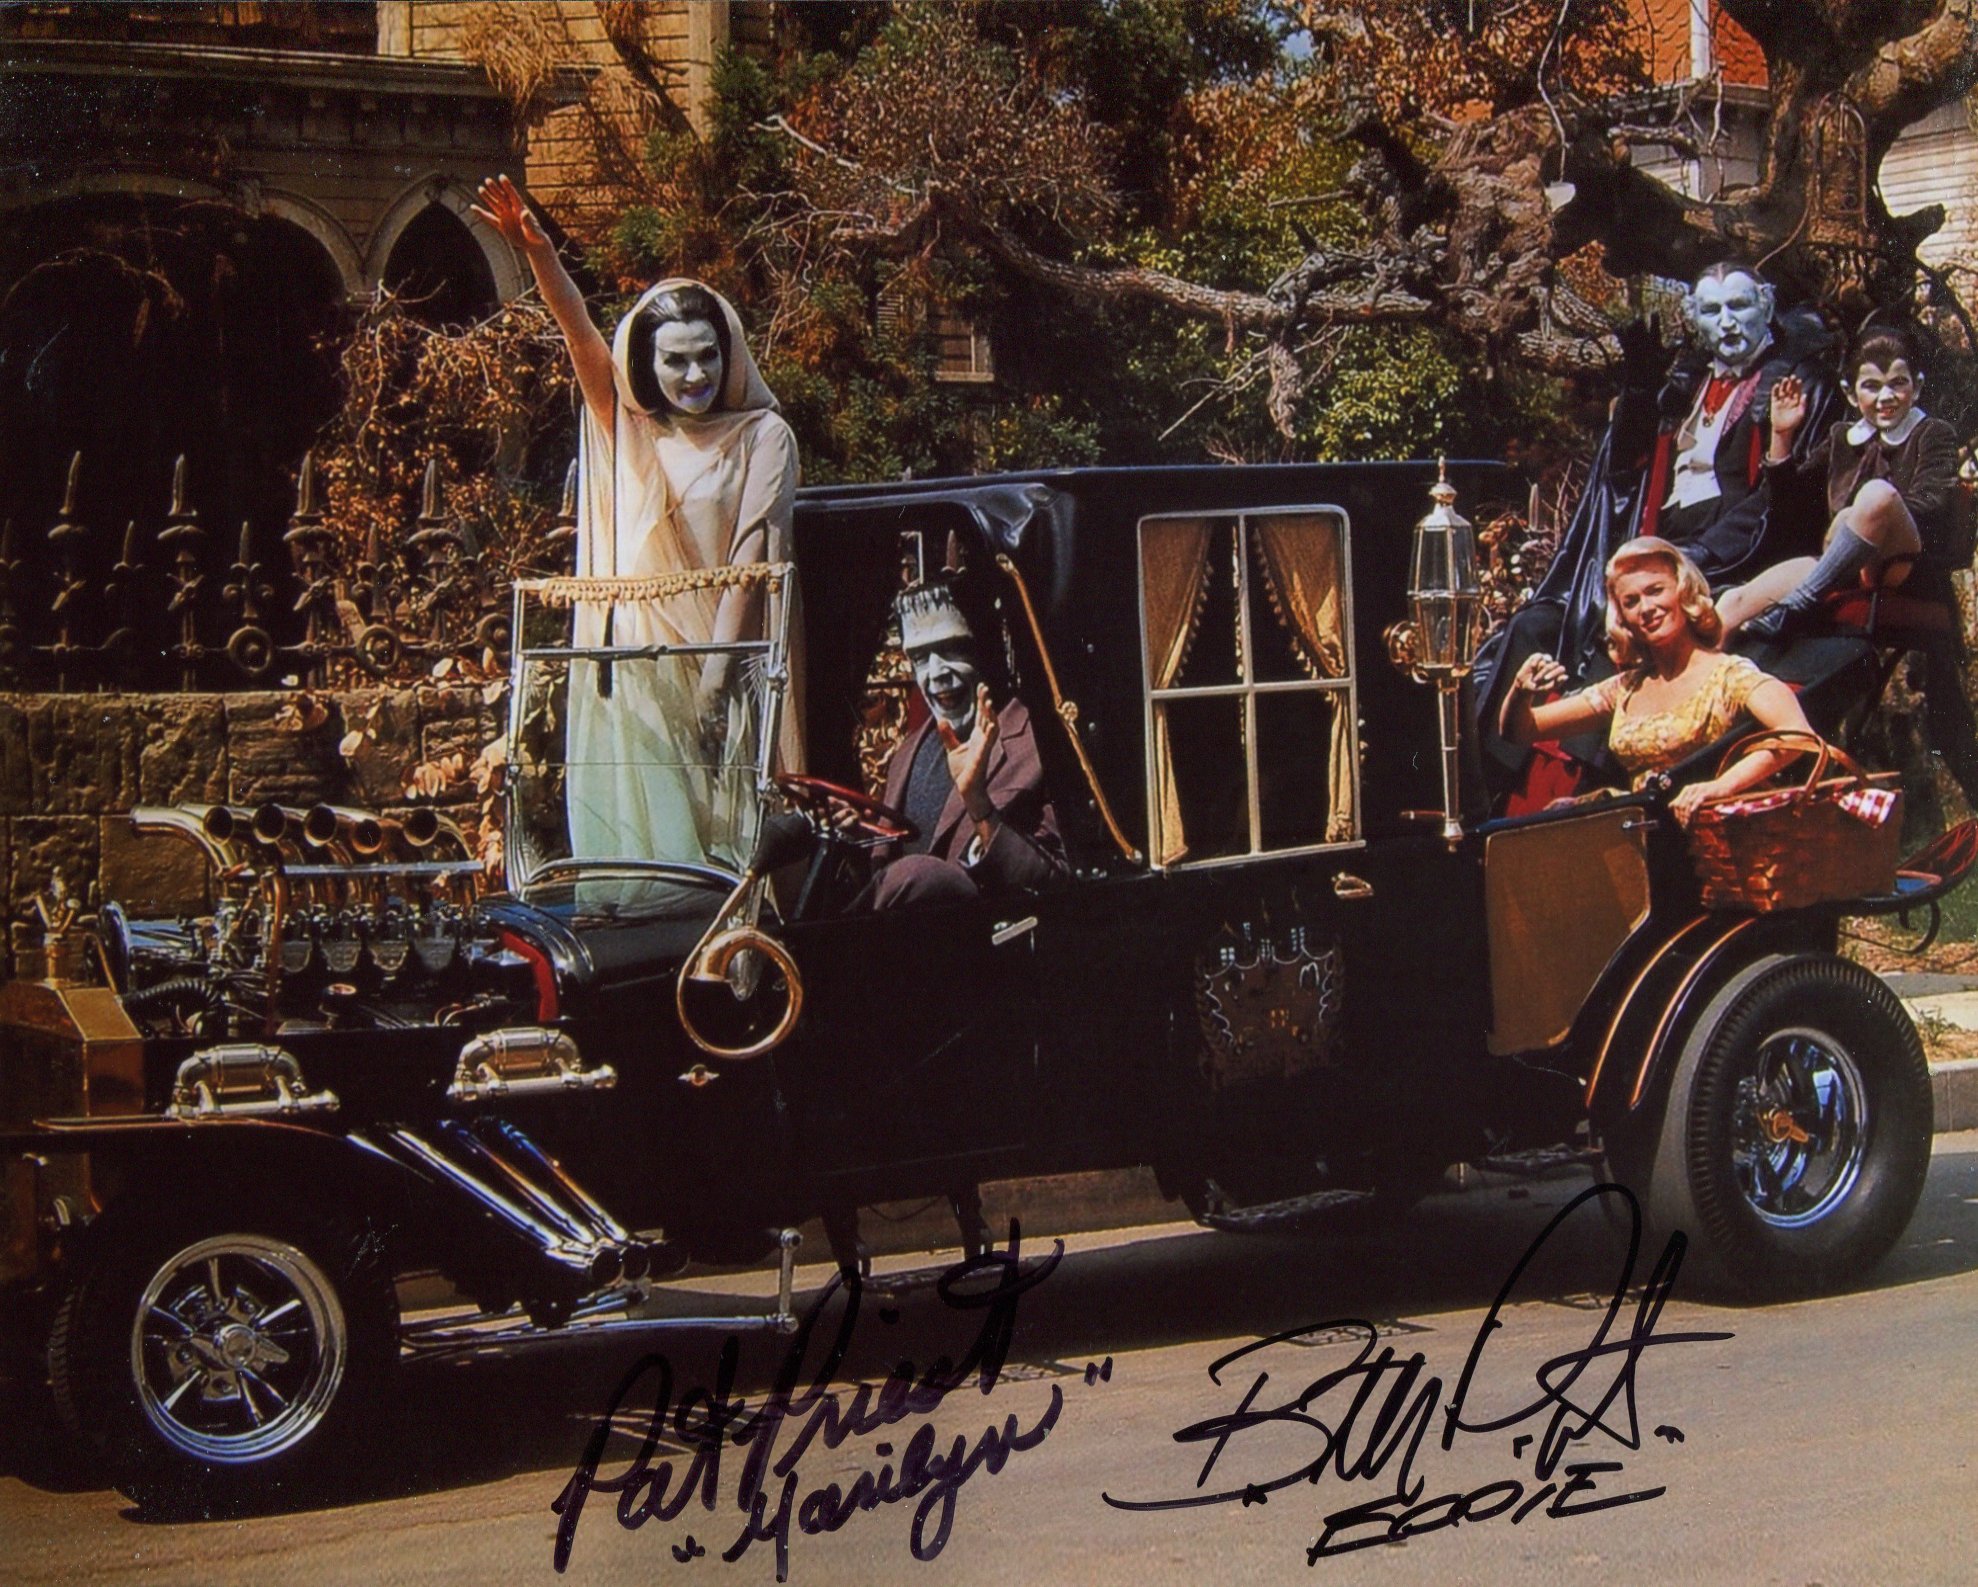 The Munsters 8x10 photo signed by Pat Priest as Marilyn Munster and Butch Patrick as Eddie